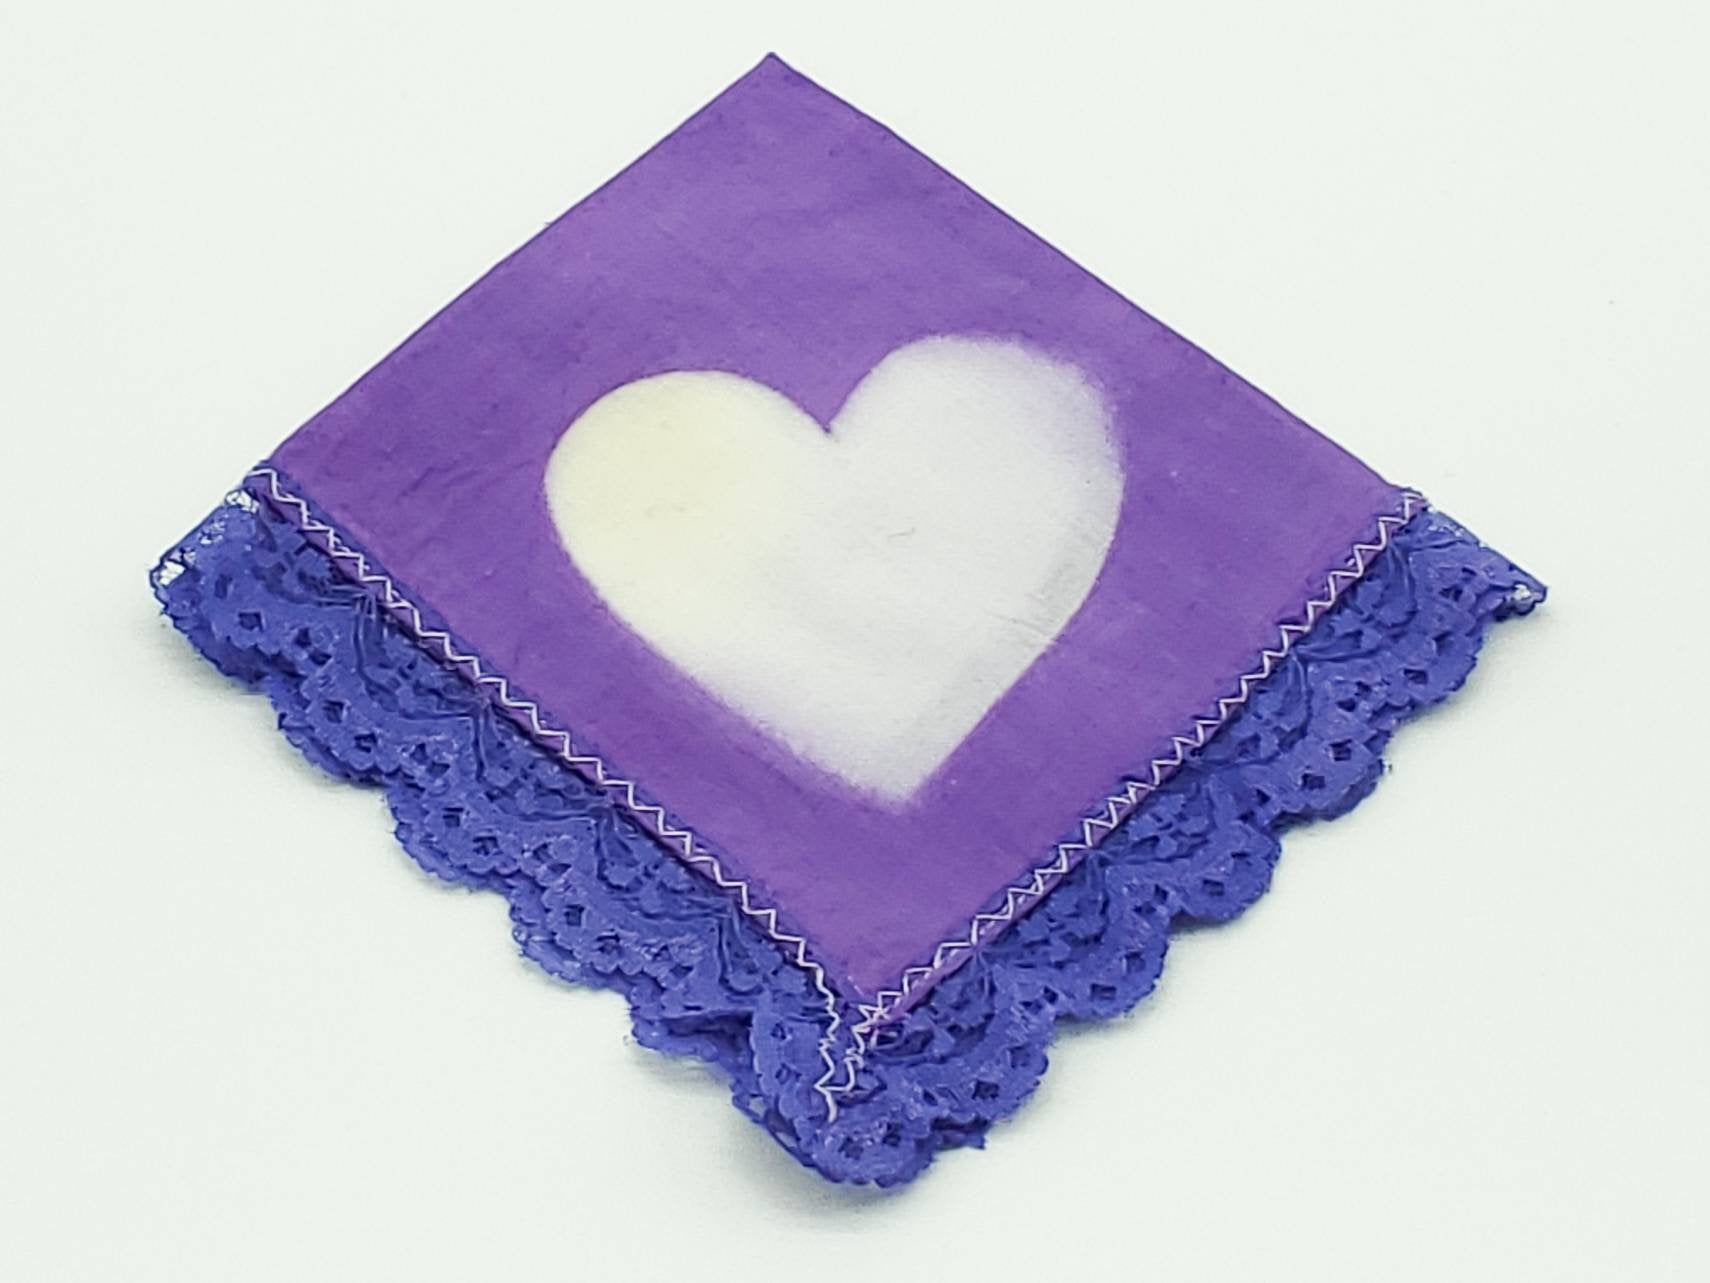 Itajime Hearts Handkerchief or Pocket Square with Violet Lace Trim - The Caffeinated Raven